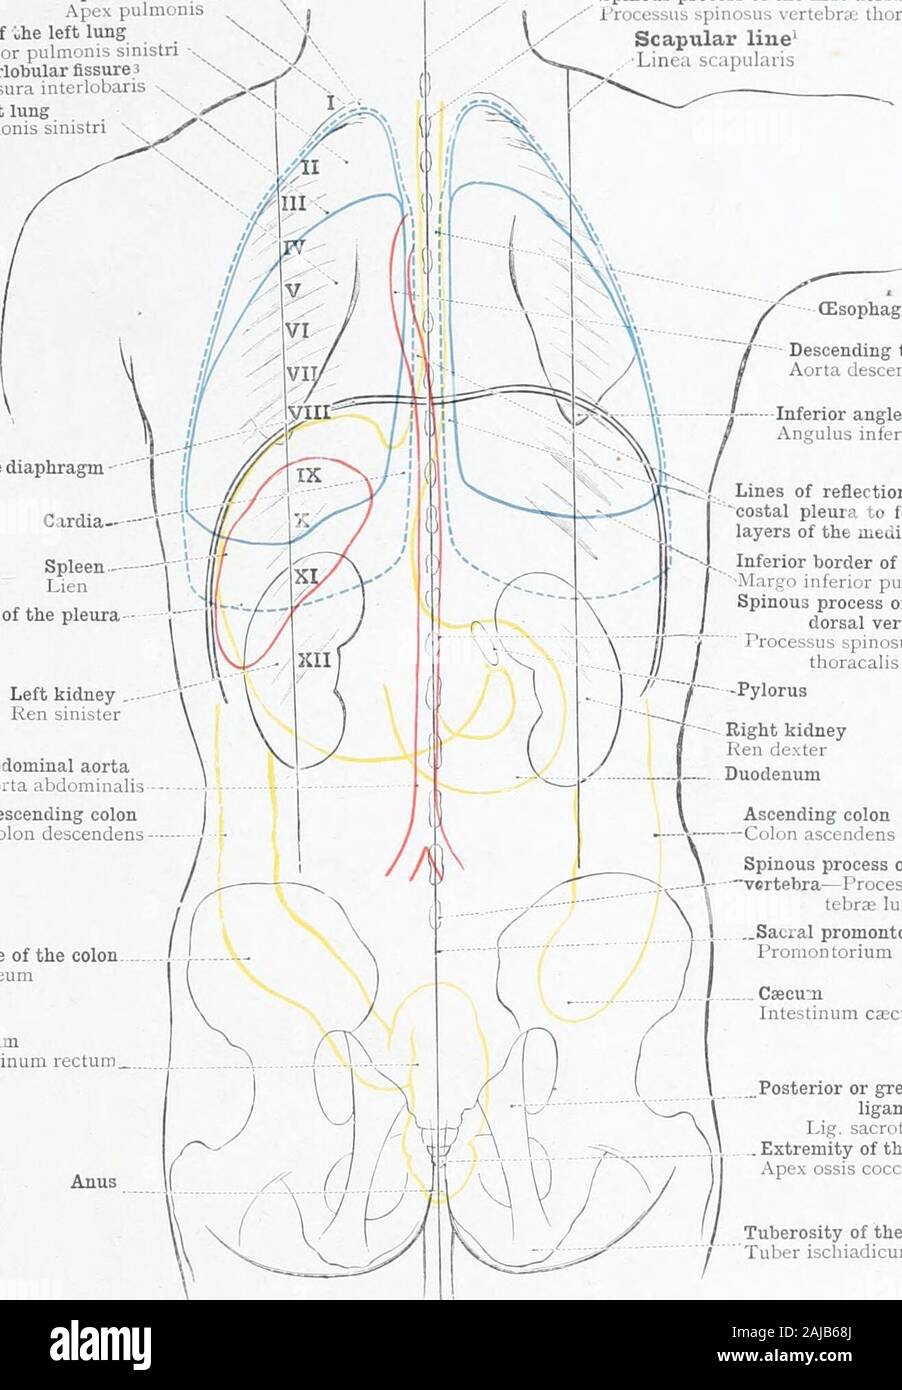 An atlas of human anatomy for students and physicians . of the spleen are black. GUIDE-LlNES FOR THE DETERMINATION OF THE POSITION OF THE THORACIC ORGANS : ANTERIOR MEDIAN LiNE, Sternal Line (sec Appendix, note ), Parasternal Line {see Appendix-, note ), and Mamillary Line seeAppendix, note *). The Ribs are distinguished by Roman Numerals. Projection-Outlines of the Thoracic and Abdominal Viscera. TOPOGRAPHICAL ANATOMY OF THE THORACIC AND ABDOMINAL VISCERA 487 Cervical pleura- Cupula pleuraeApex of the lungApex pulmonisUpper lobe of ihe left lungLobus superior pulmonis sinistri •-,,Interlobul Stock Photo